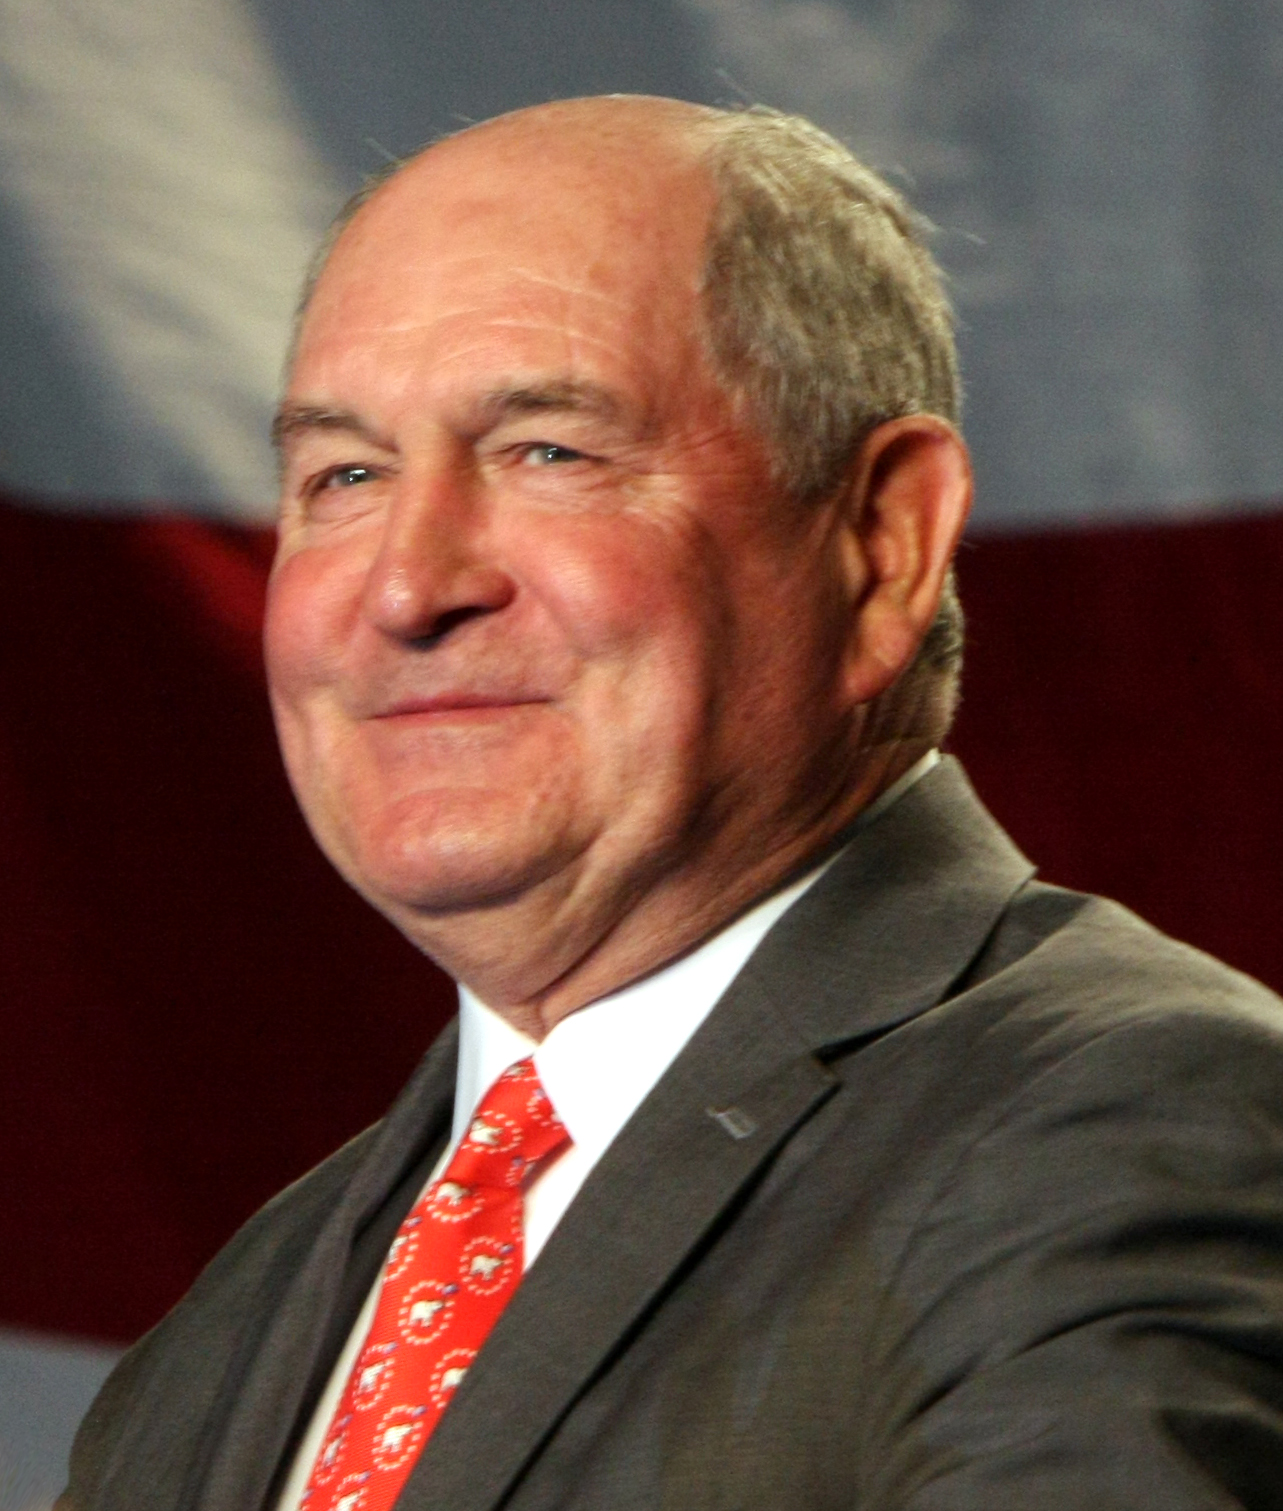 NFU Statement on Sonny Perdue’s Confirmation as Agriculture Secretary